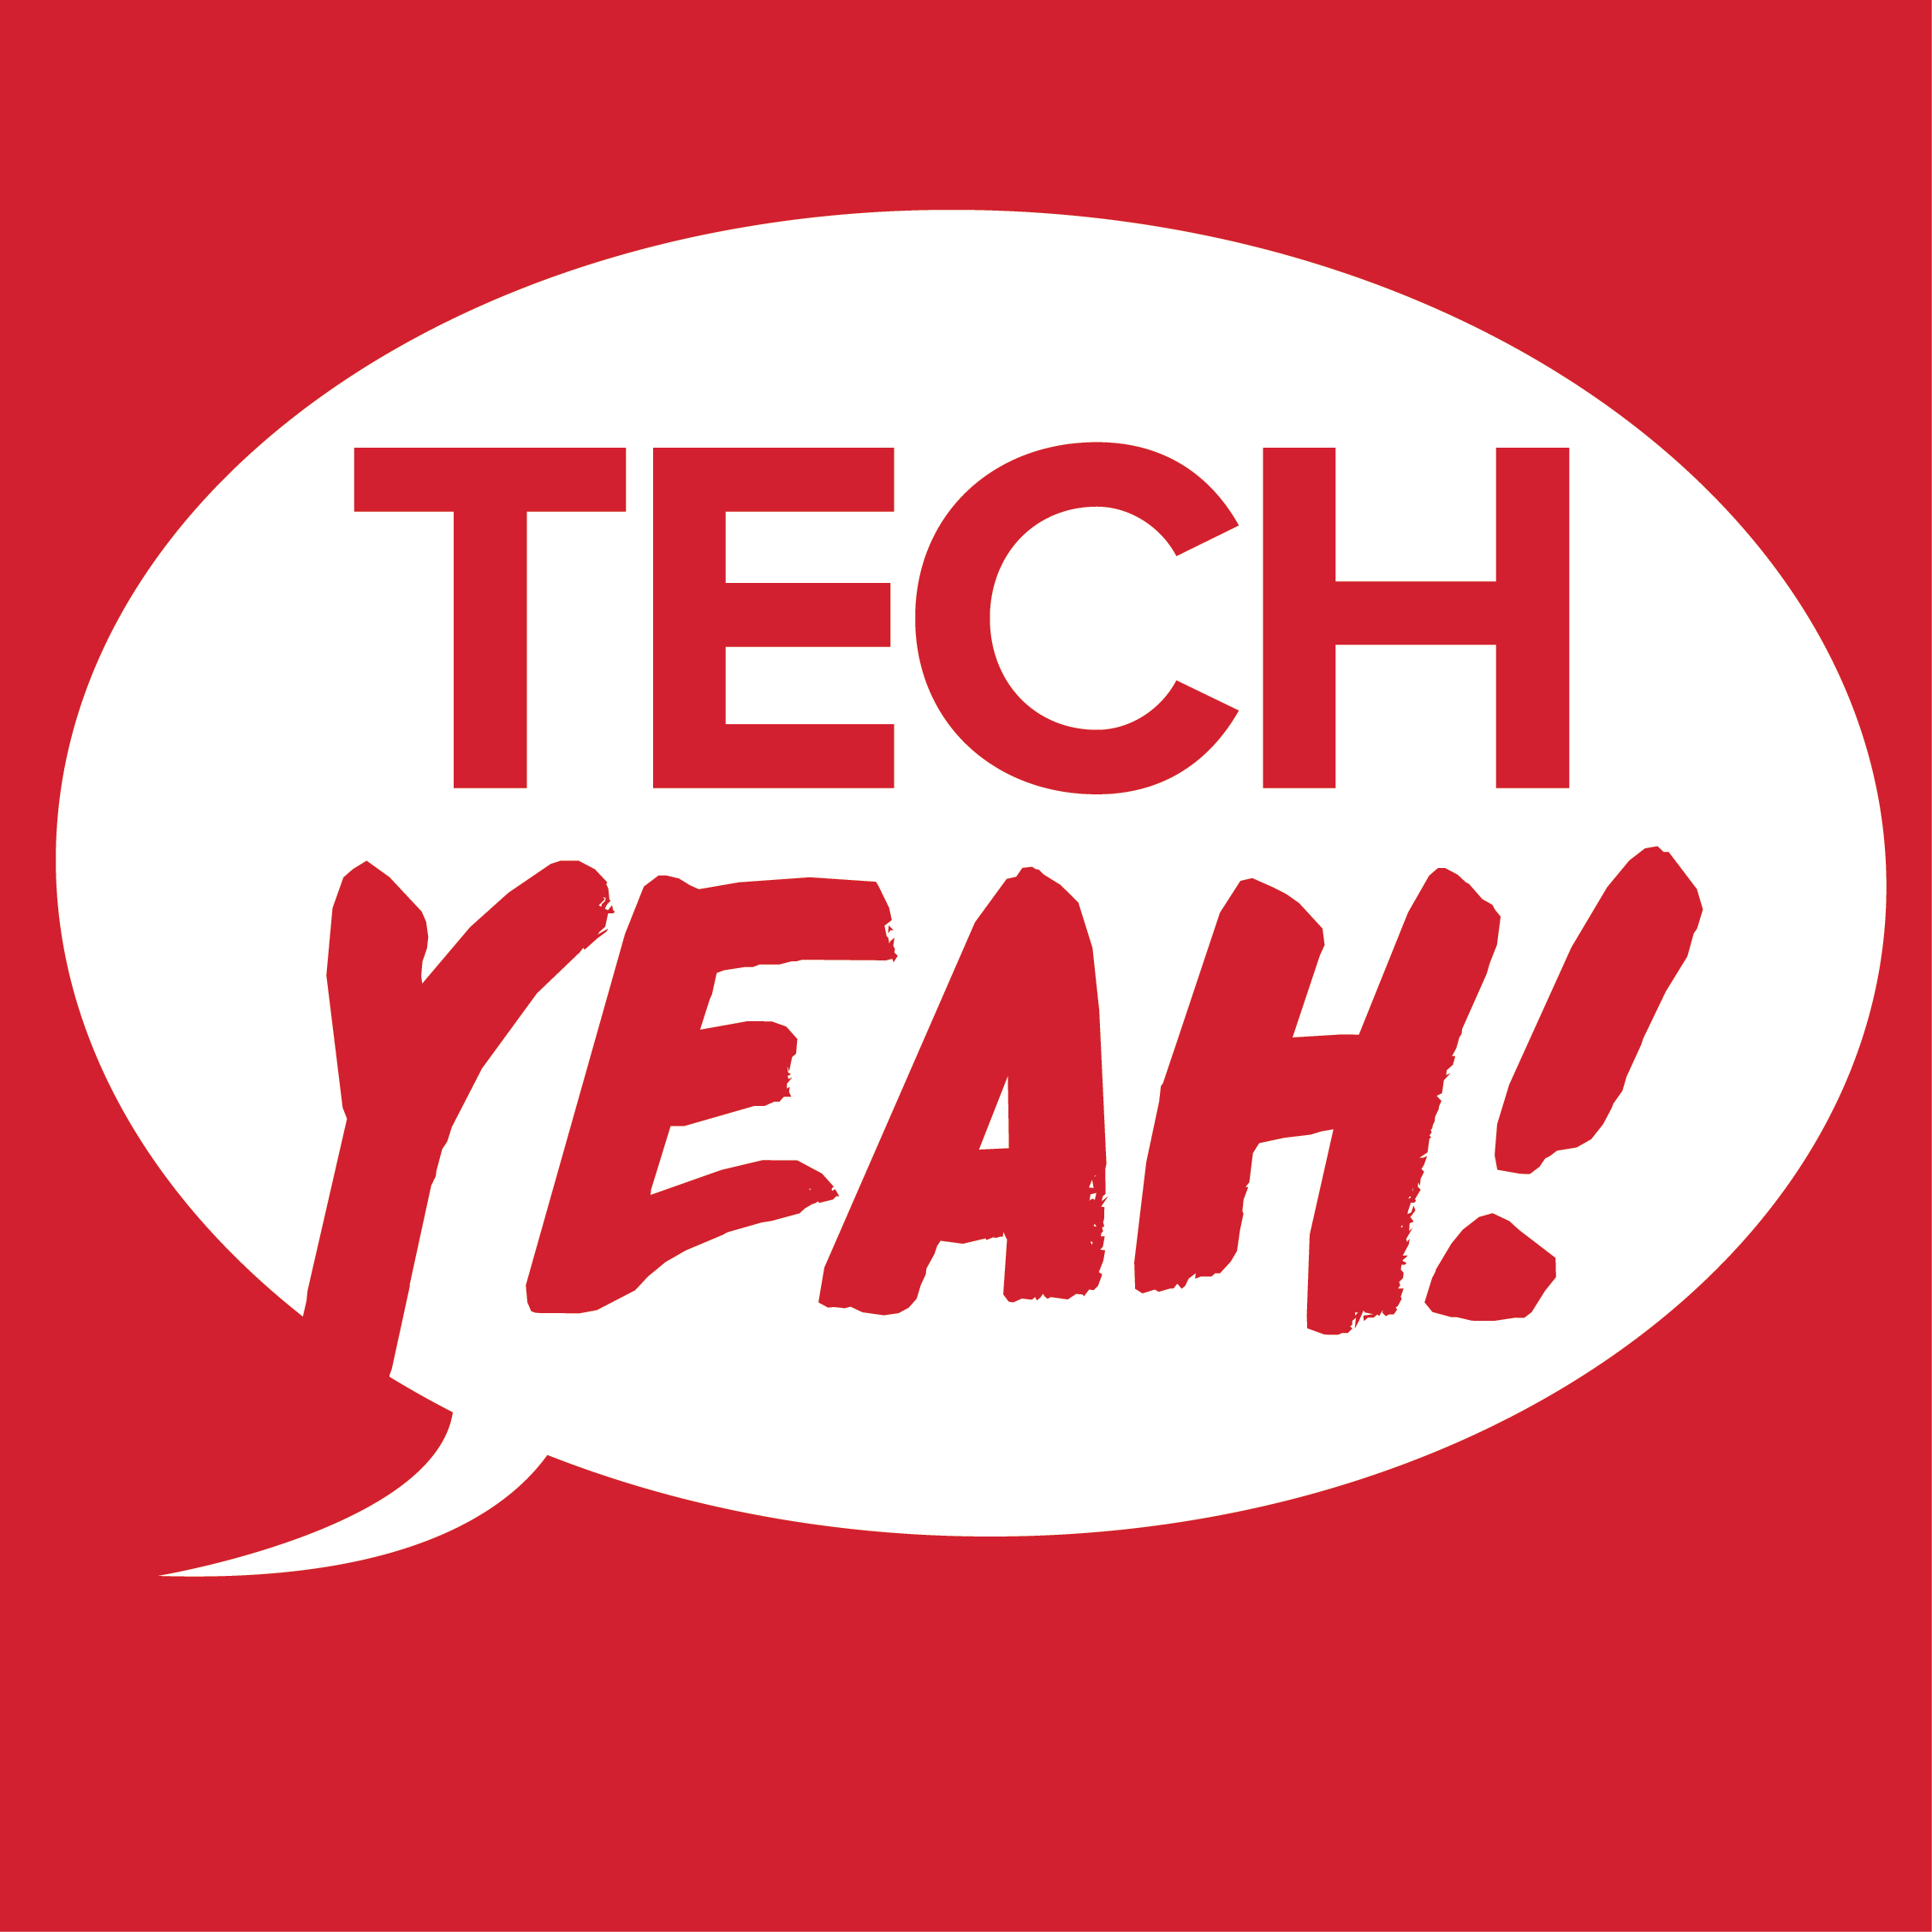 TECH YEAH 2017 STACKED LOGO red on white bubble option 2